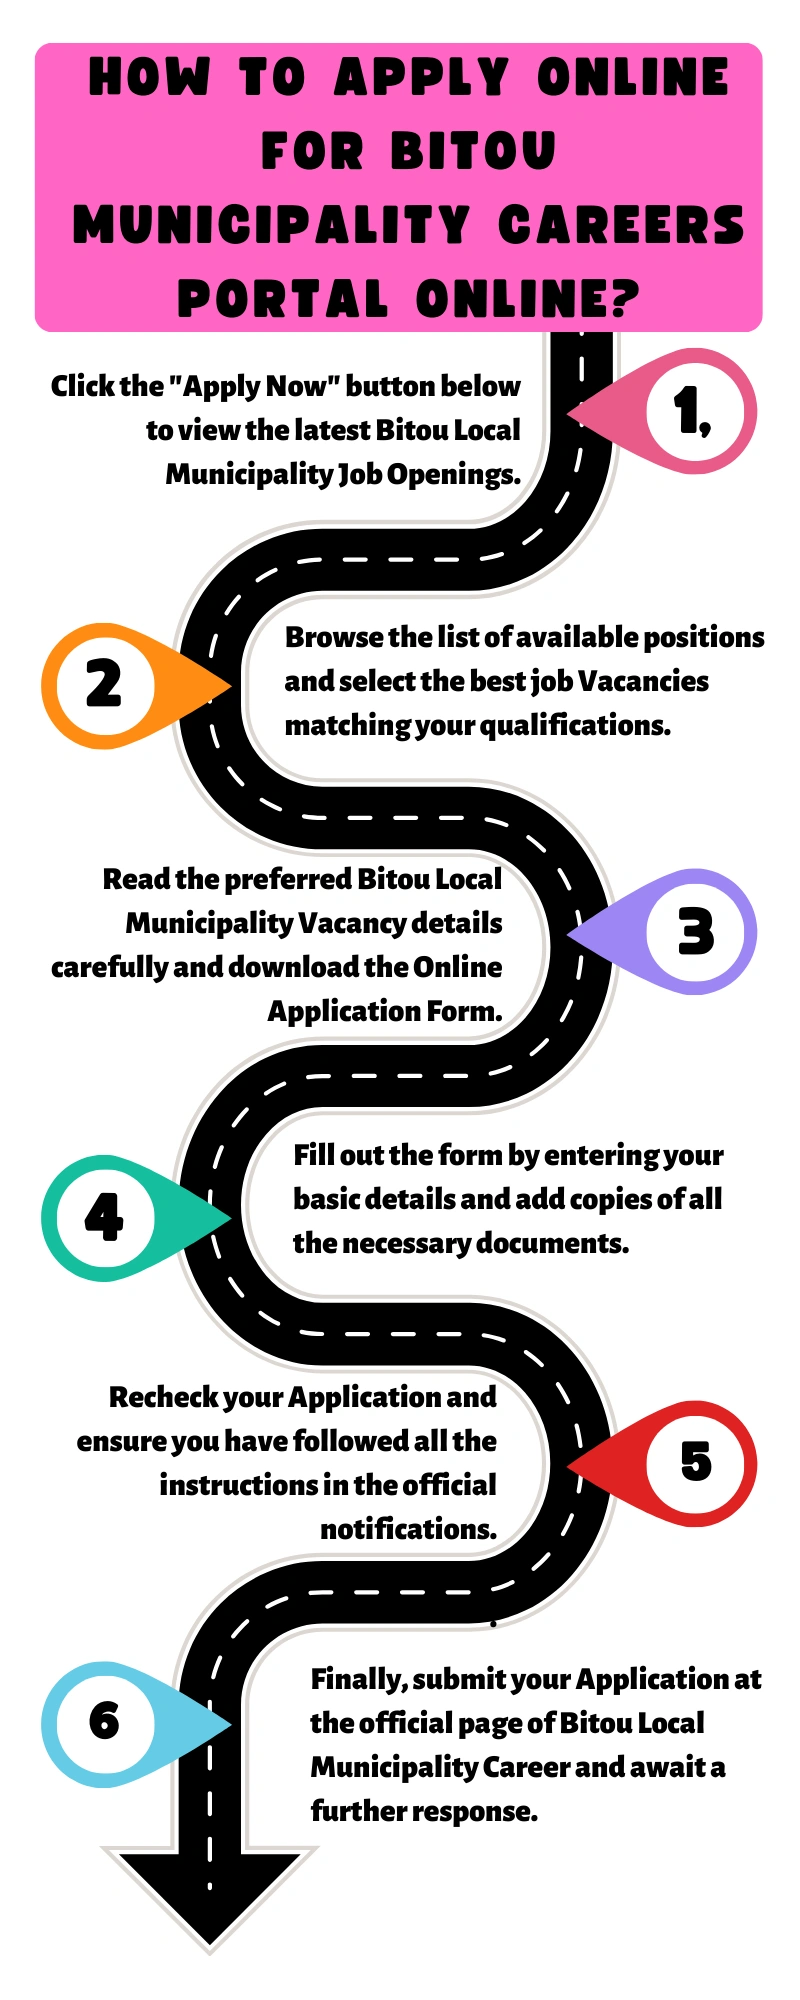 How to Apply online for Bitou Municipality Careers Portal Online?